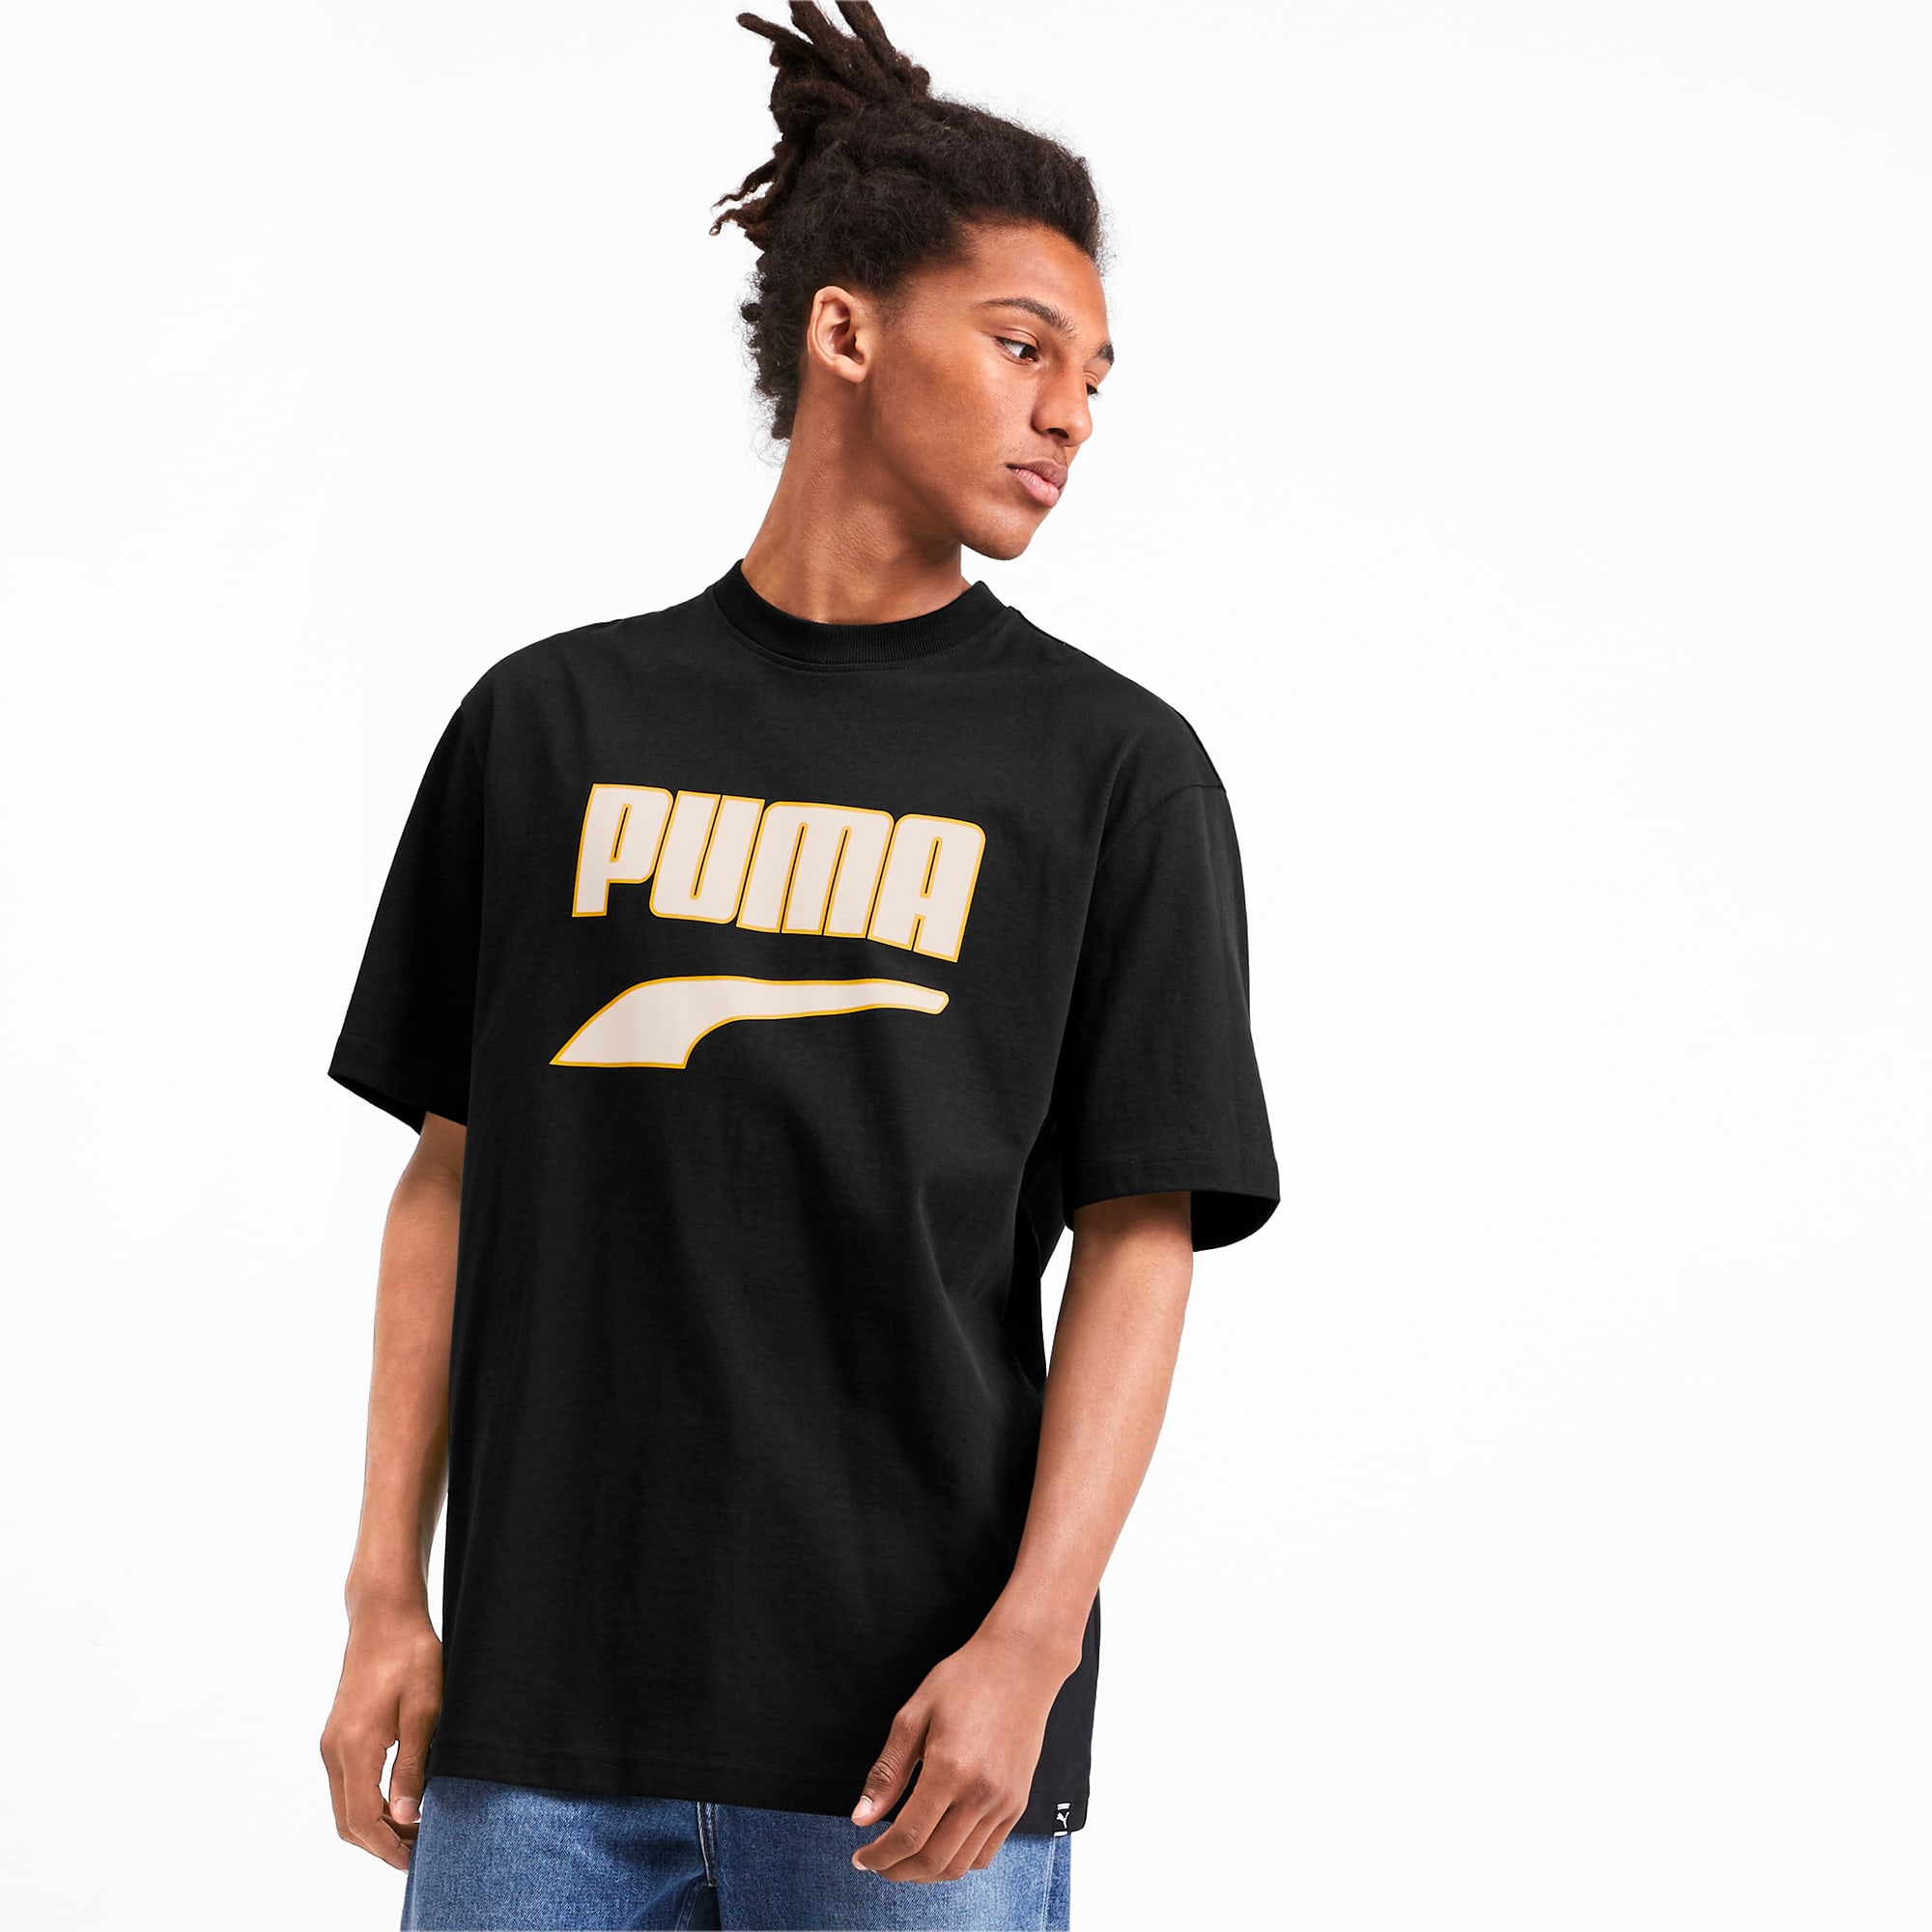 Downtown Men's Graphic Tee | PUMA US